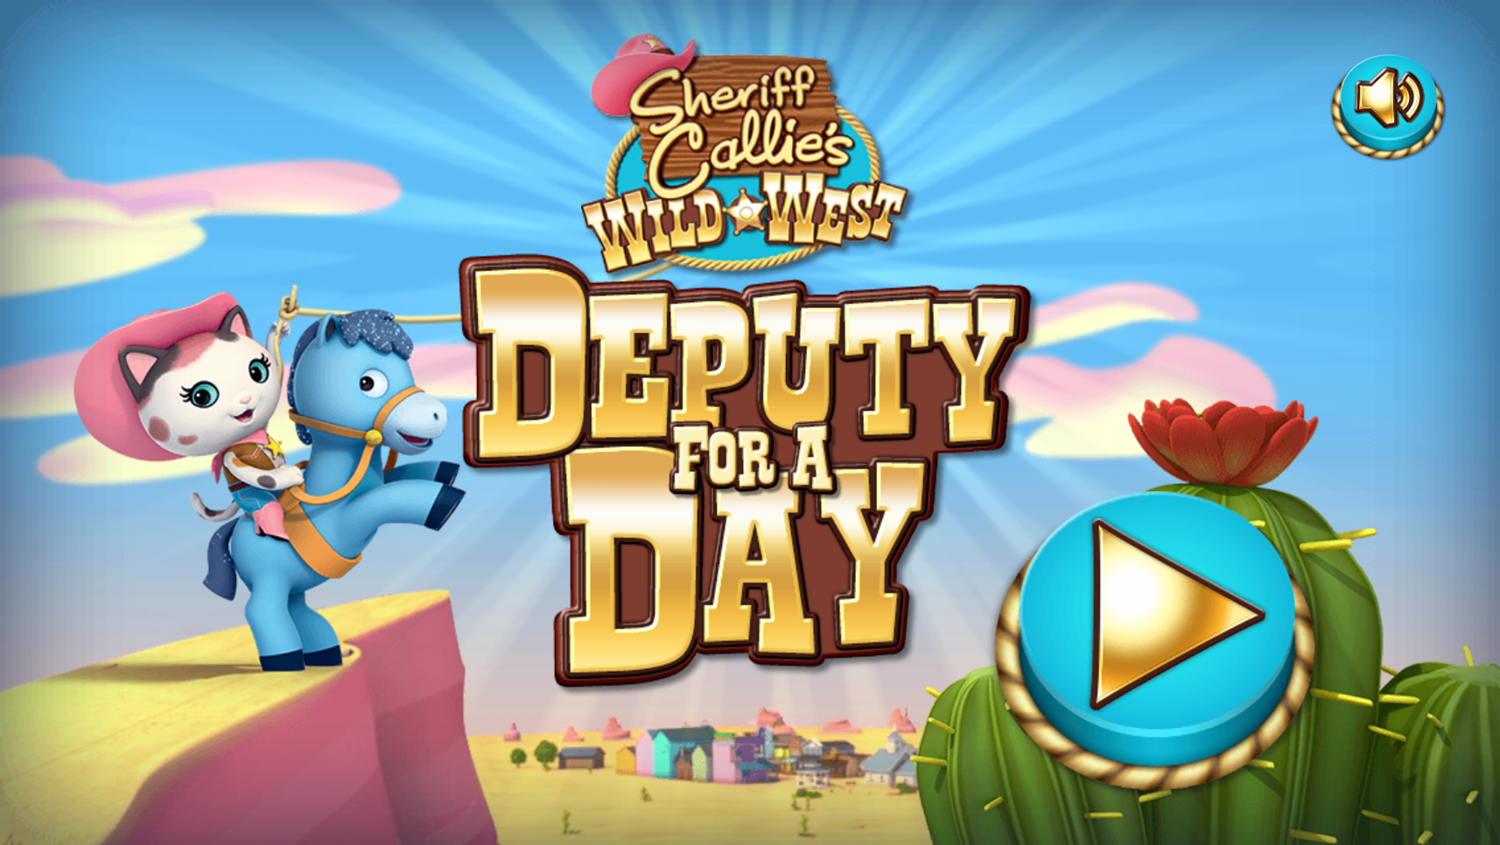 Sheriff Callie's Wild West Deputy for a Day Game Welcome Screen Screenshot.